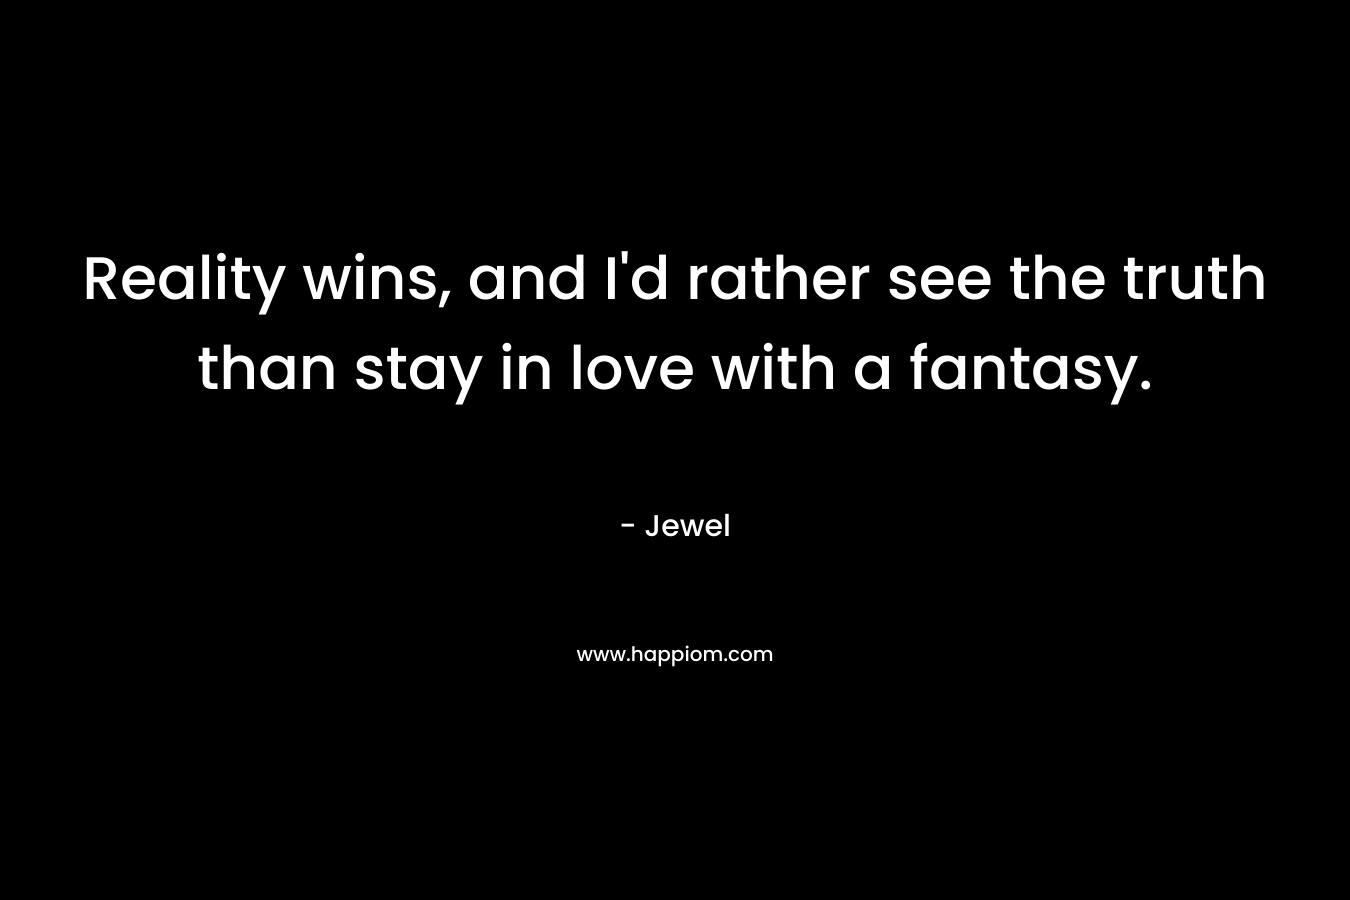 Reality wins, and I’d rather see the truth than stay in love with a fantasy. – Jewel